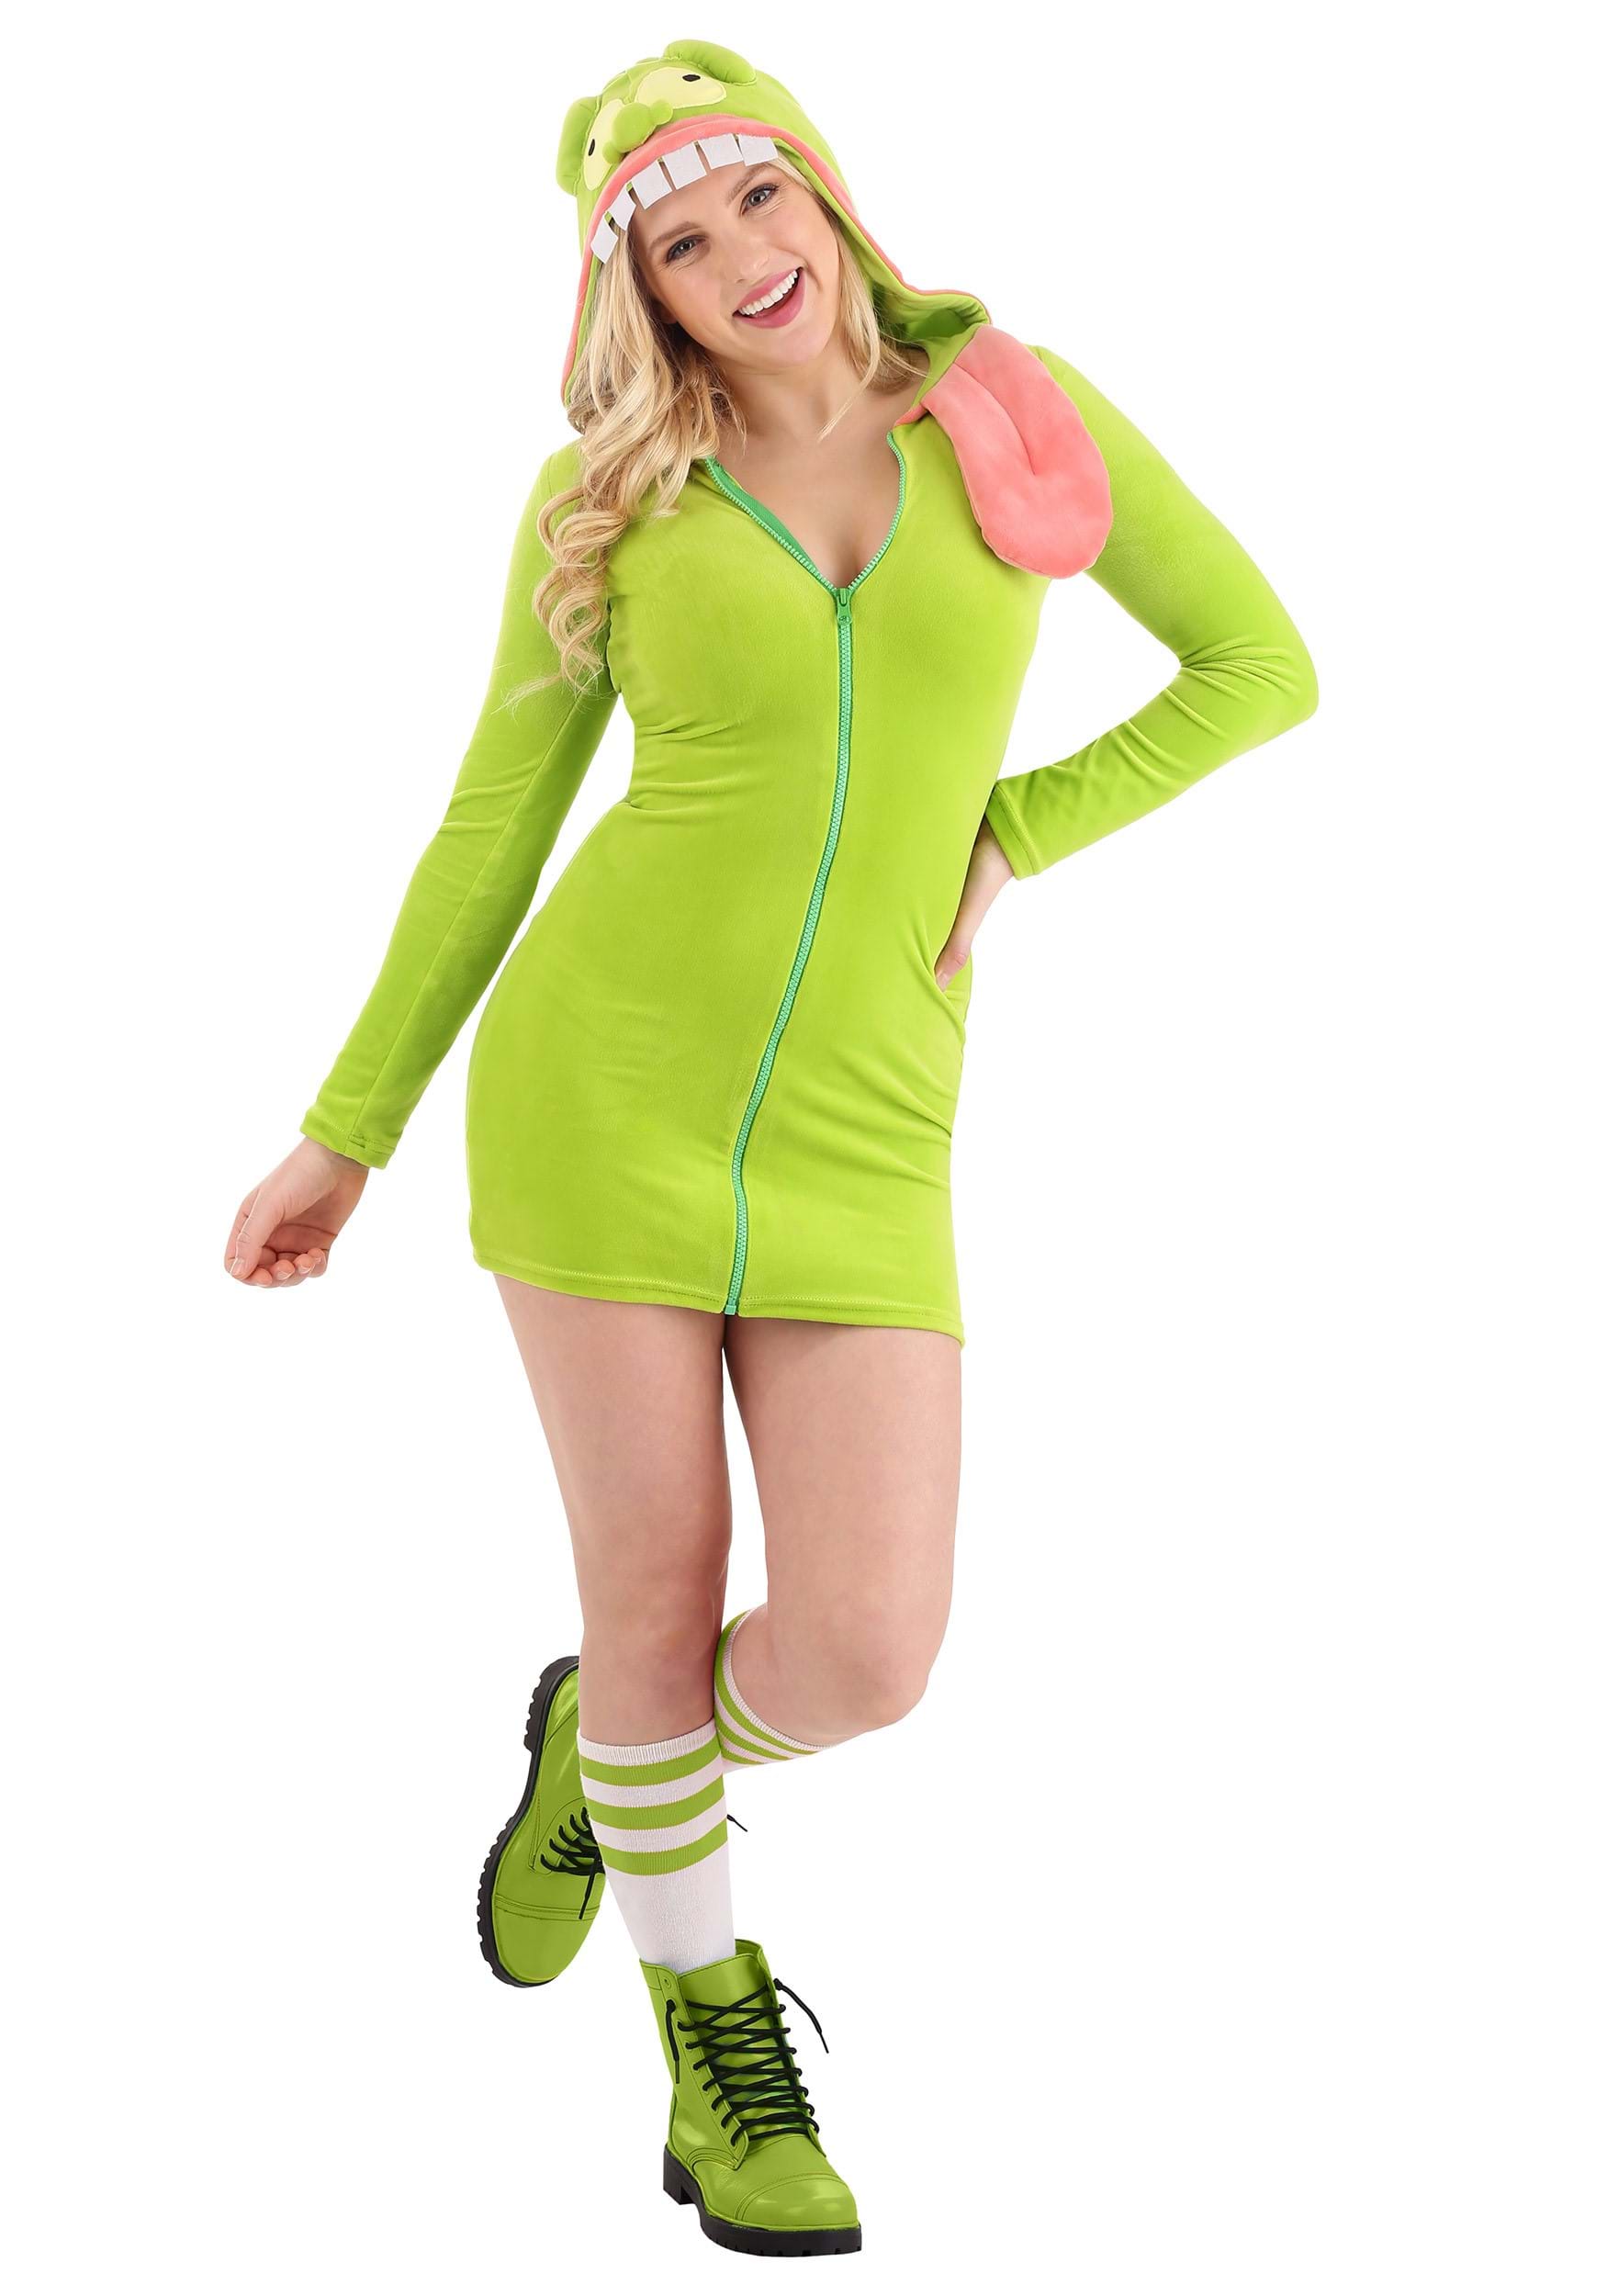 Photos - Fancy Dress Ghostbusters FUN Costumes  Slimer Hoodie  Costume for Women Gree 